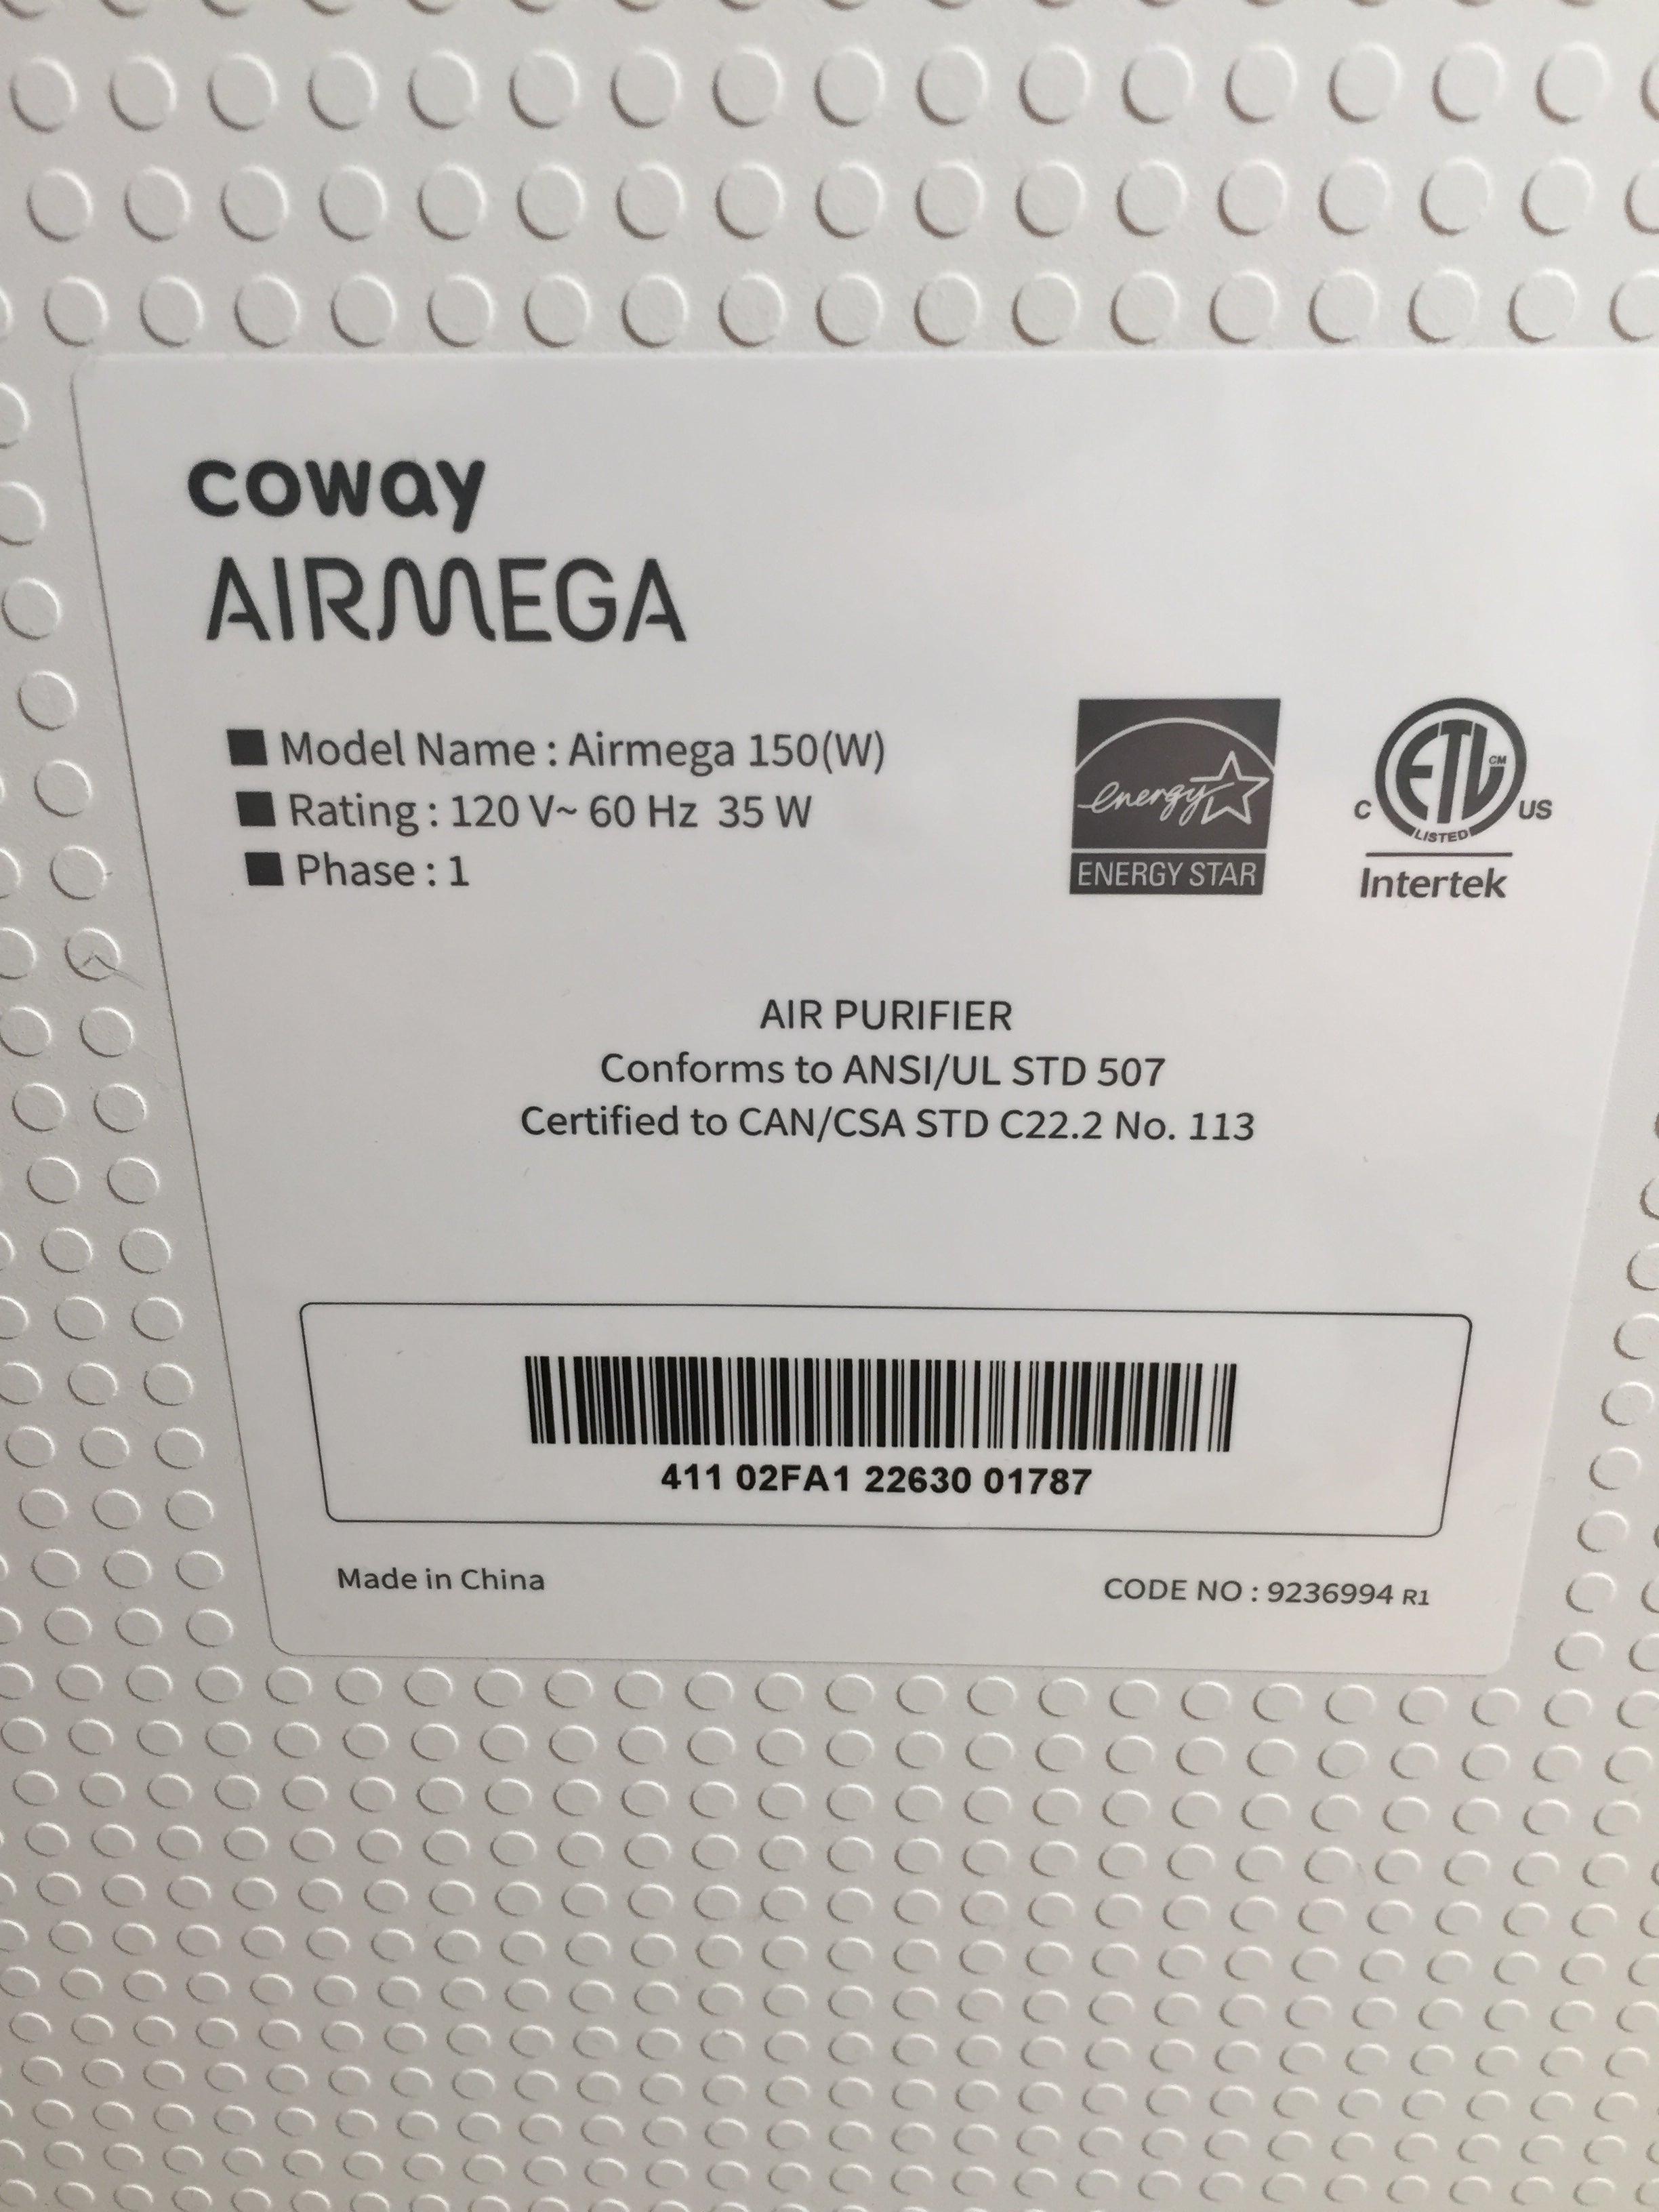 Coway Airmega 150 True HEPA Air Purifier with Quality Monitoring White (8076079005934)